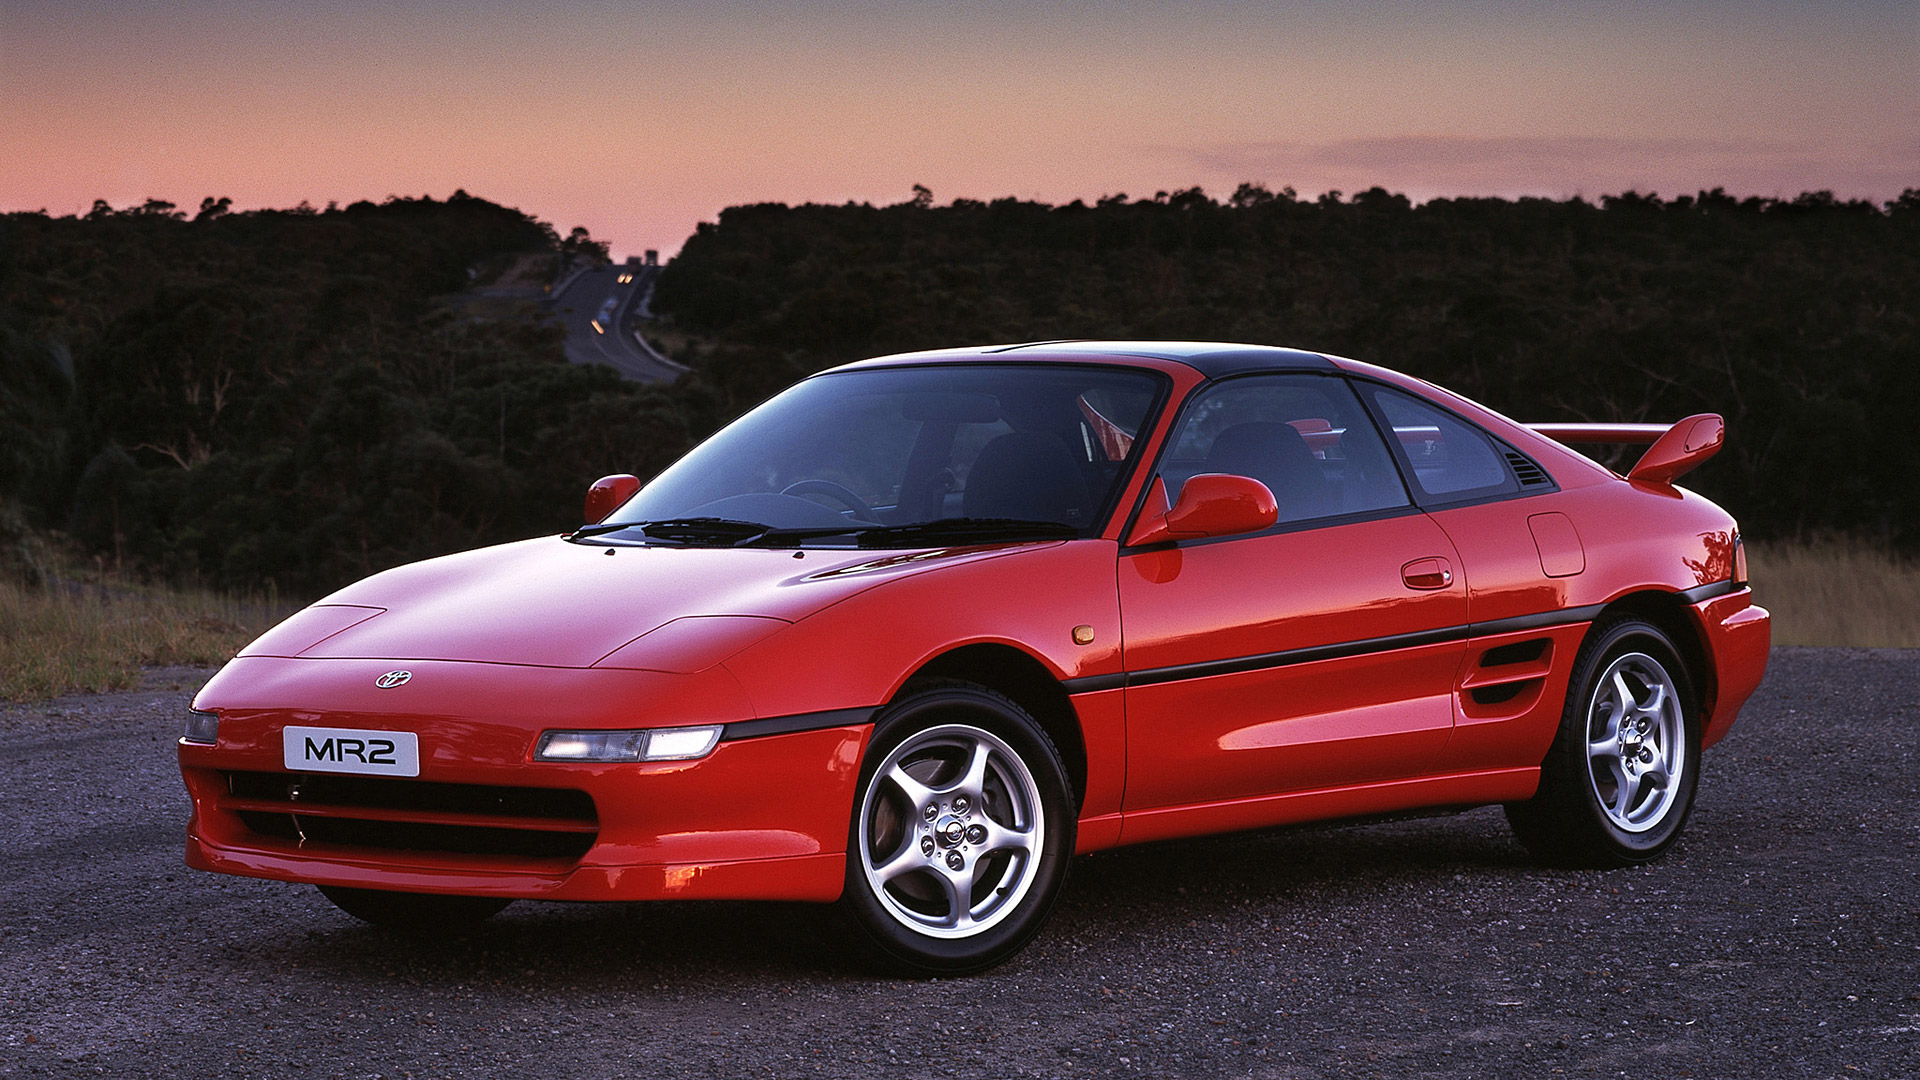 Toyota Mr2 Wallpaper HD Image Wsupercars New Acura Models